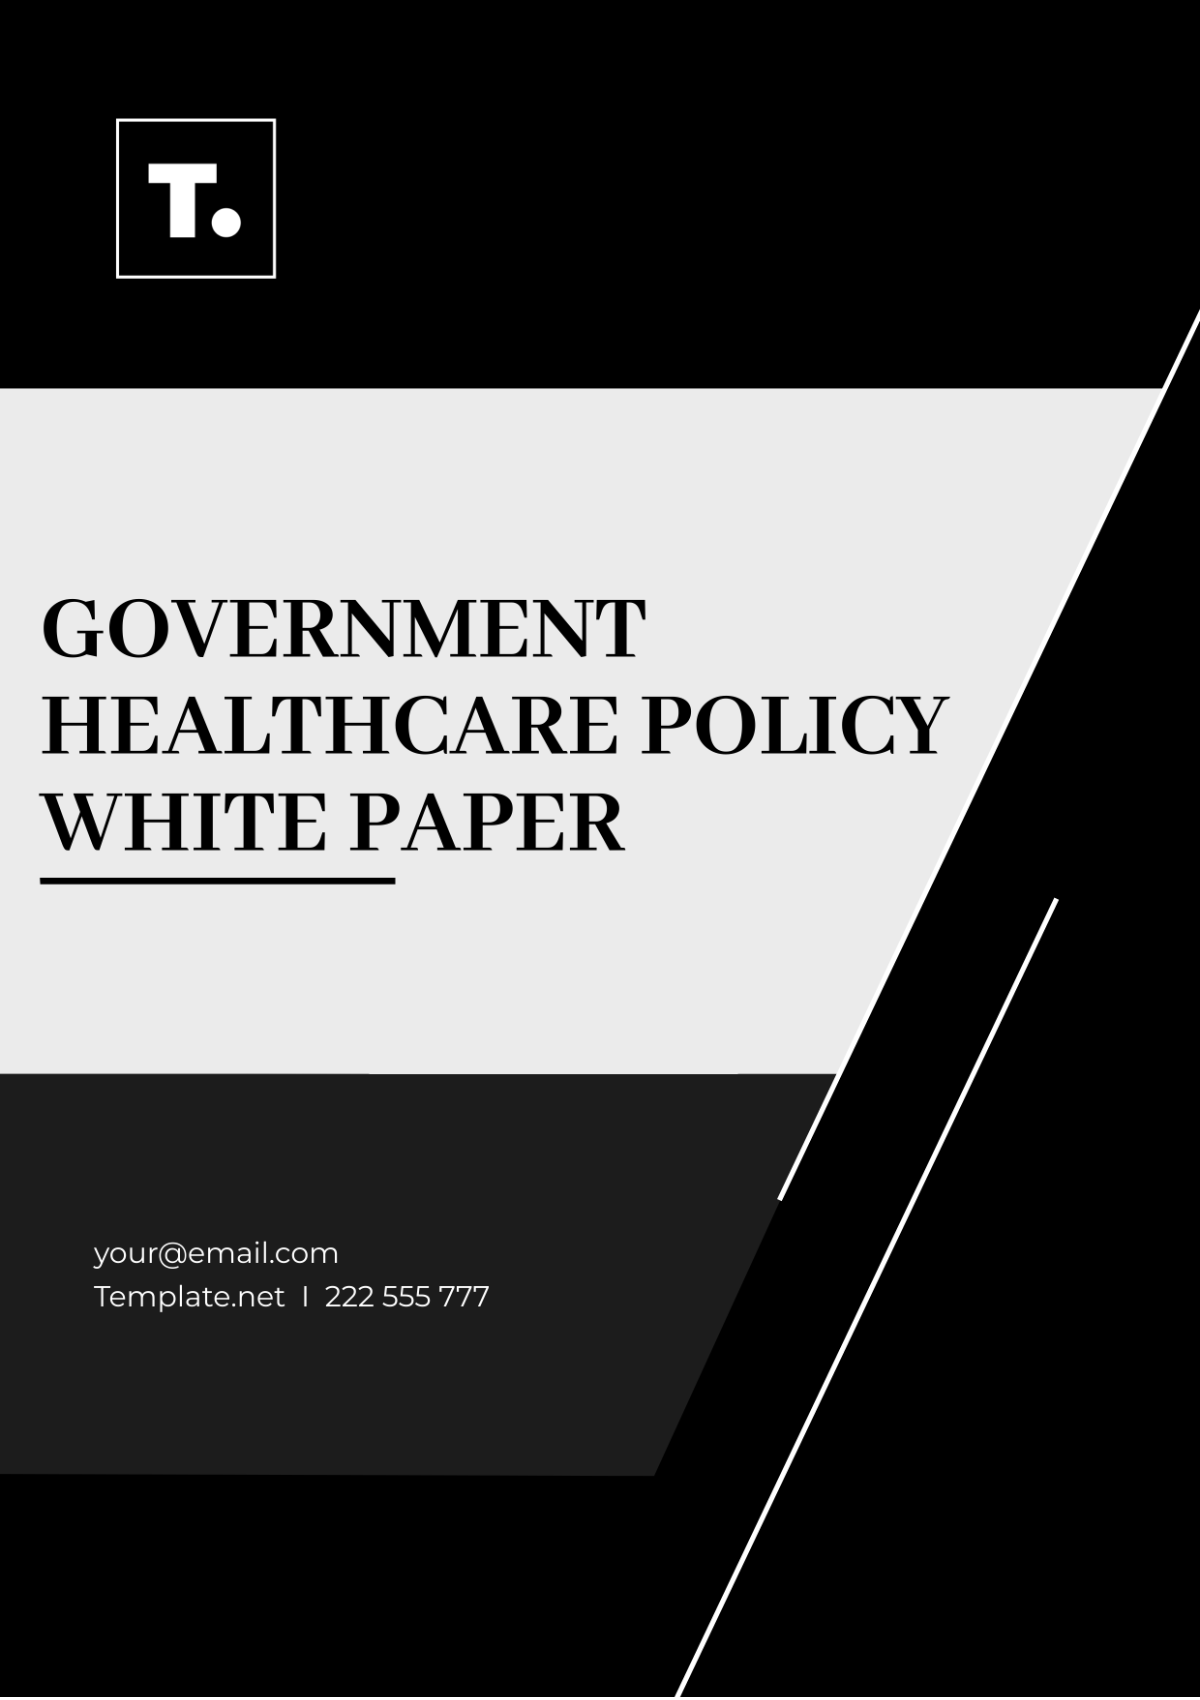 Government Healthcare Policy White Paper Template